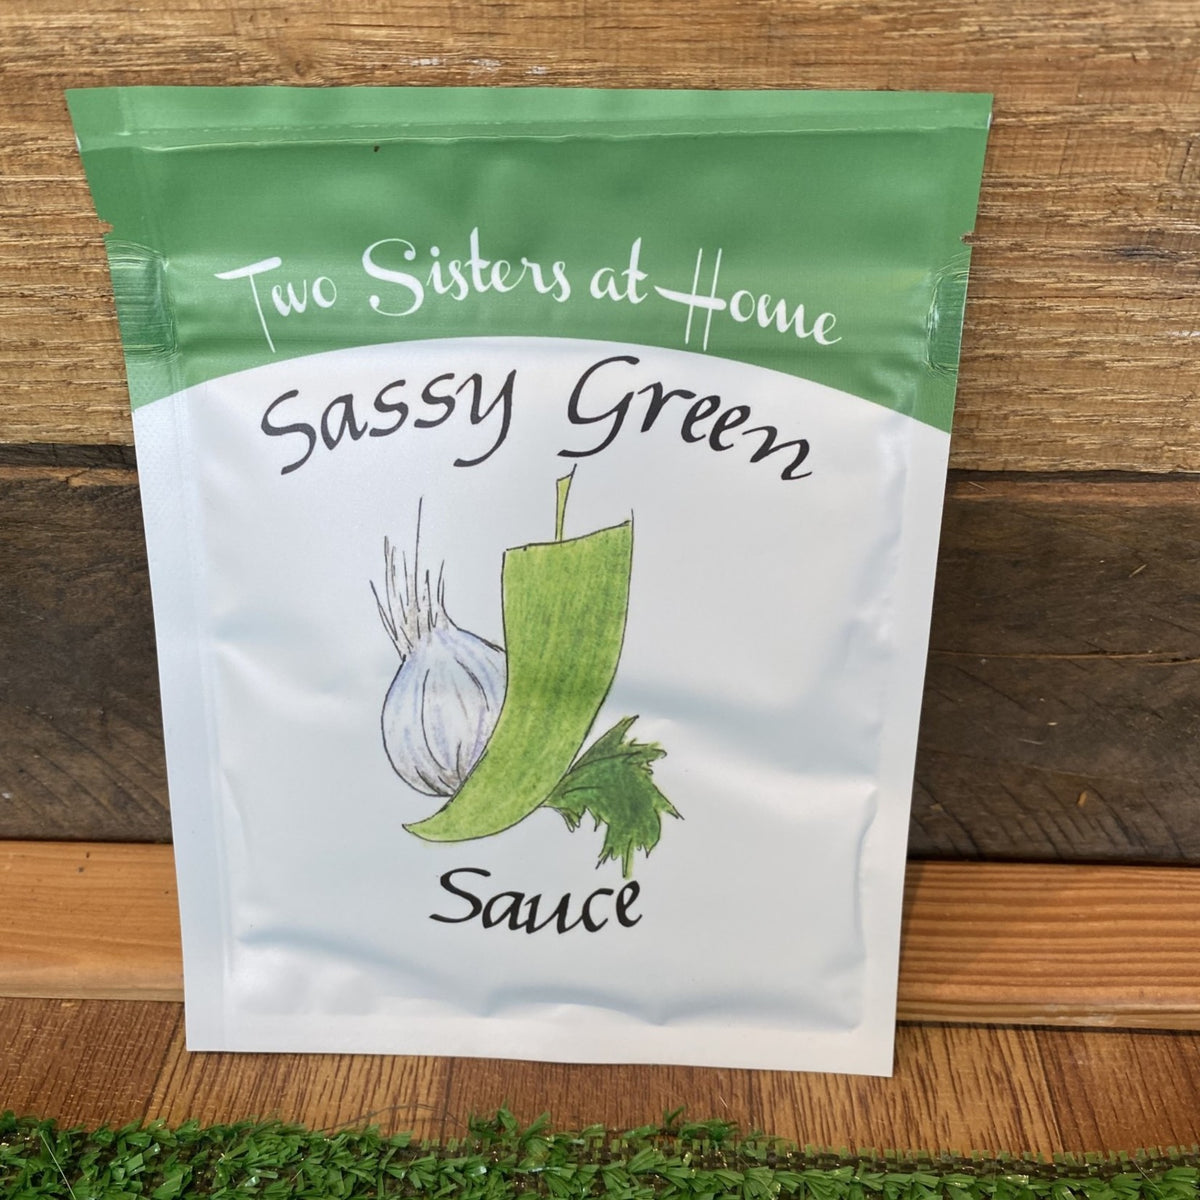 Two Sisters at Home Sassy Green Sauce Mix